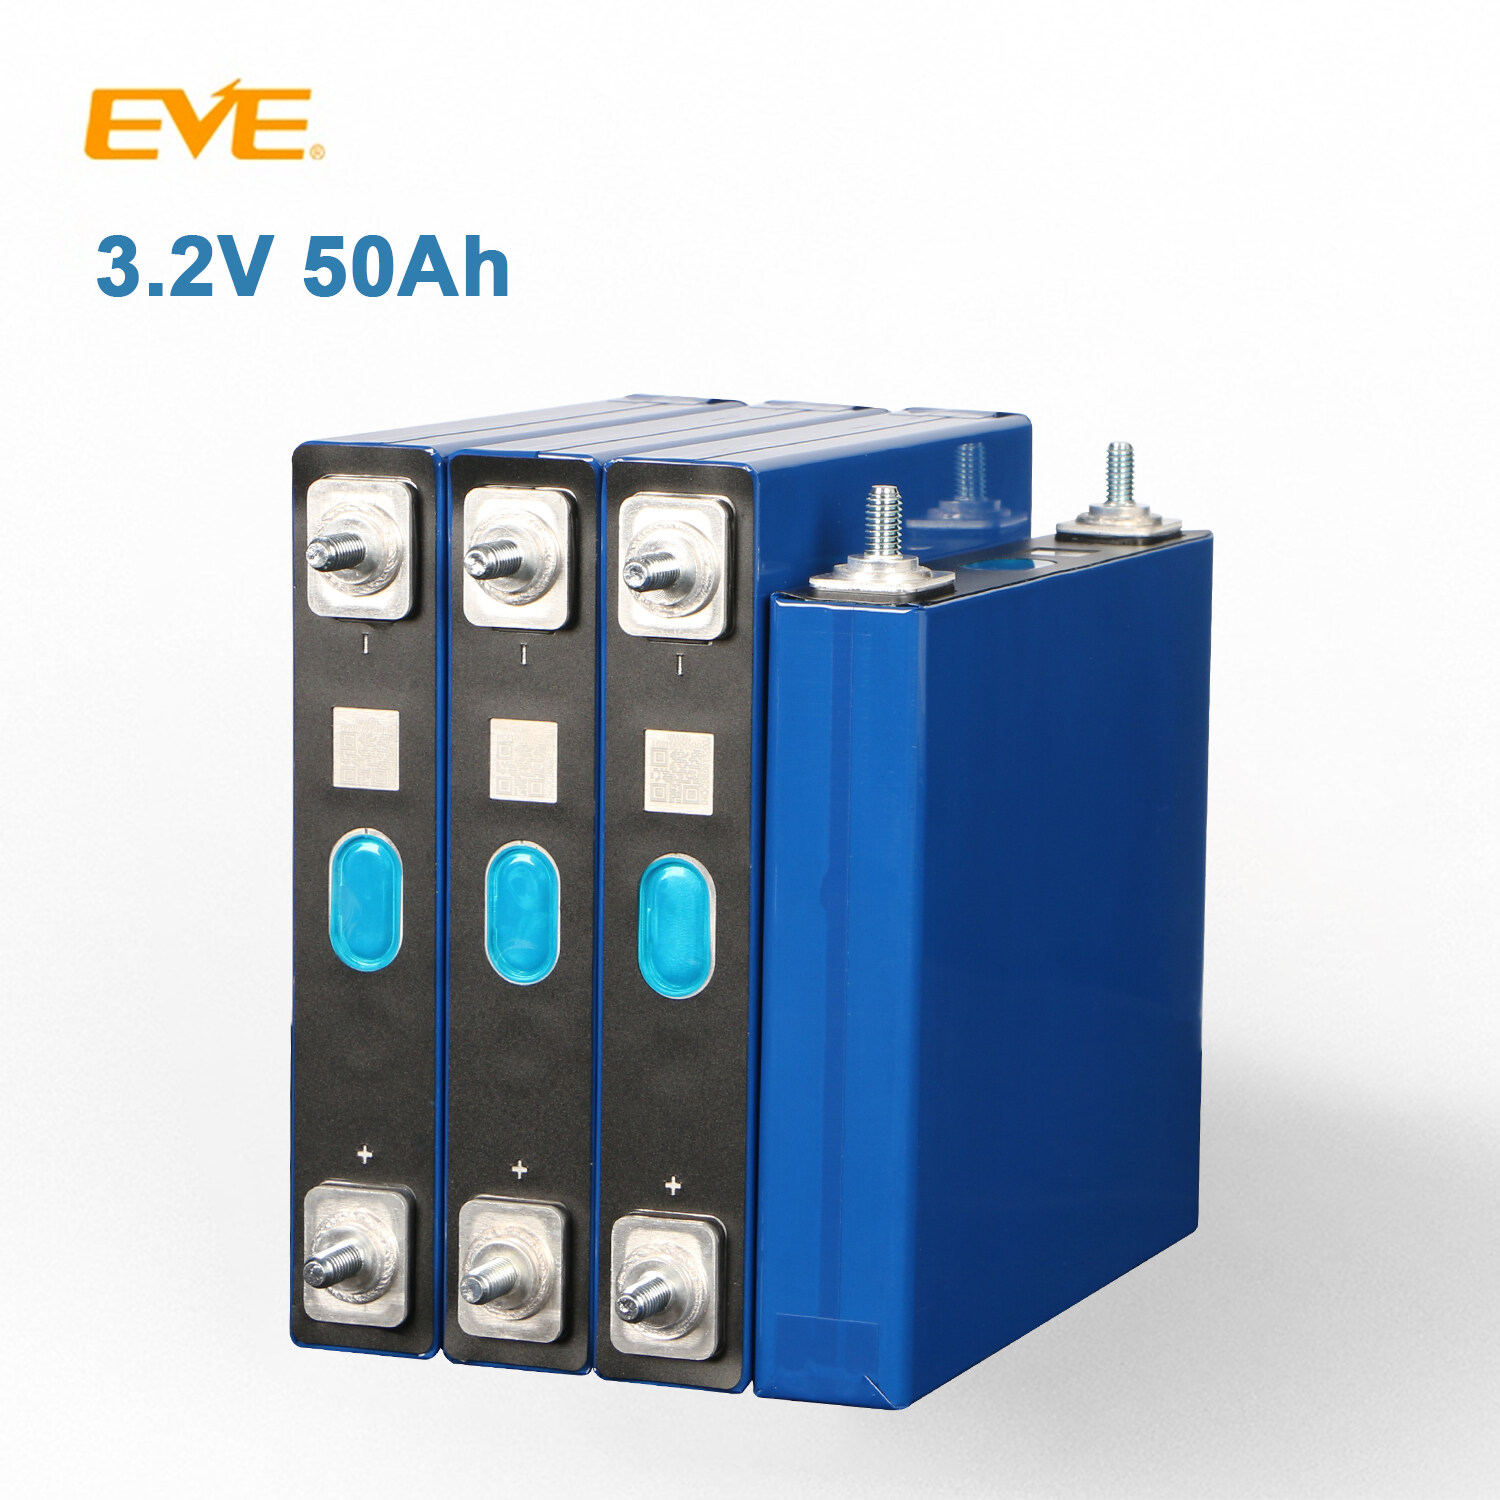 EVE 3.2V 50Ah LiFePO4 Battery Cell Applicable Electric Forklift Power Source